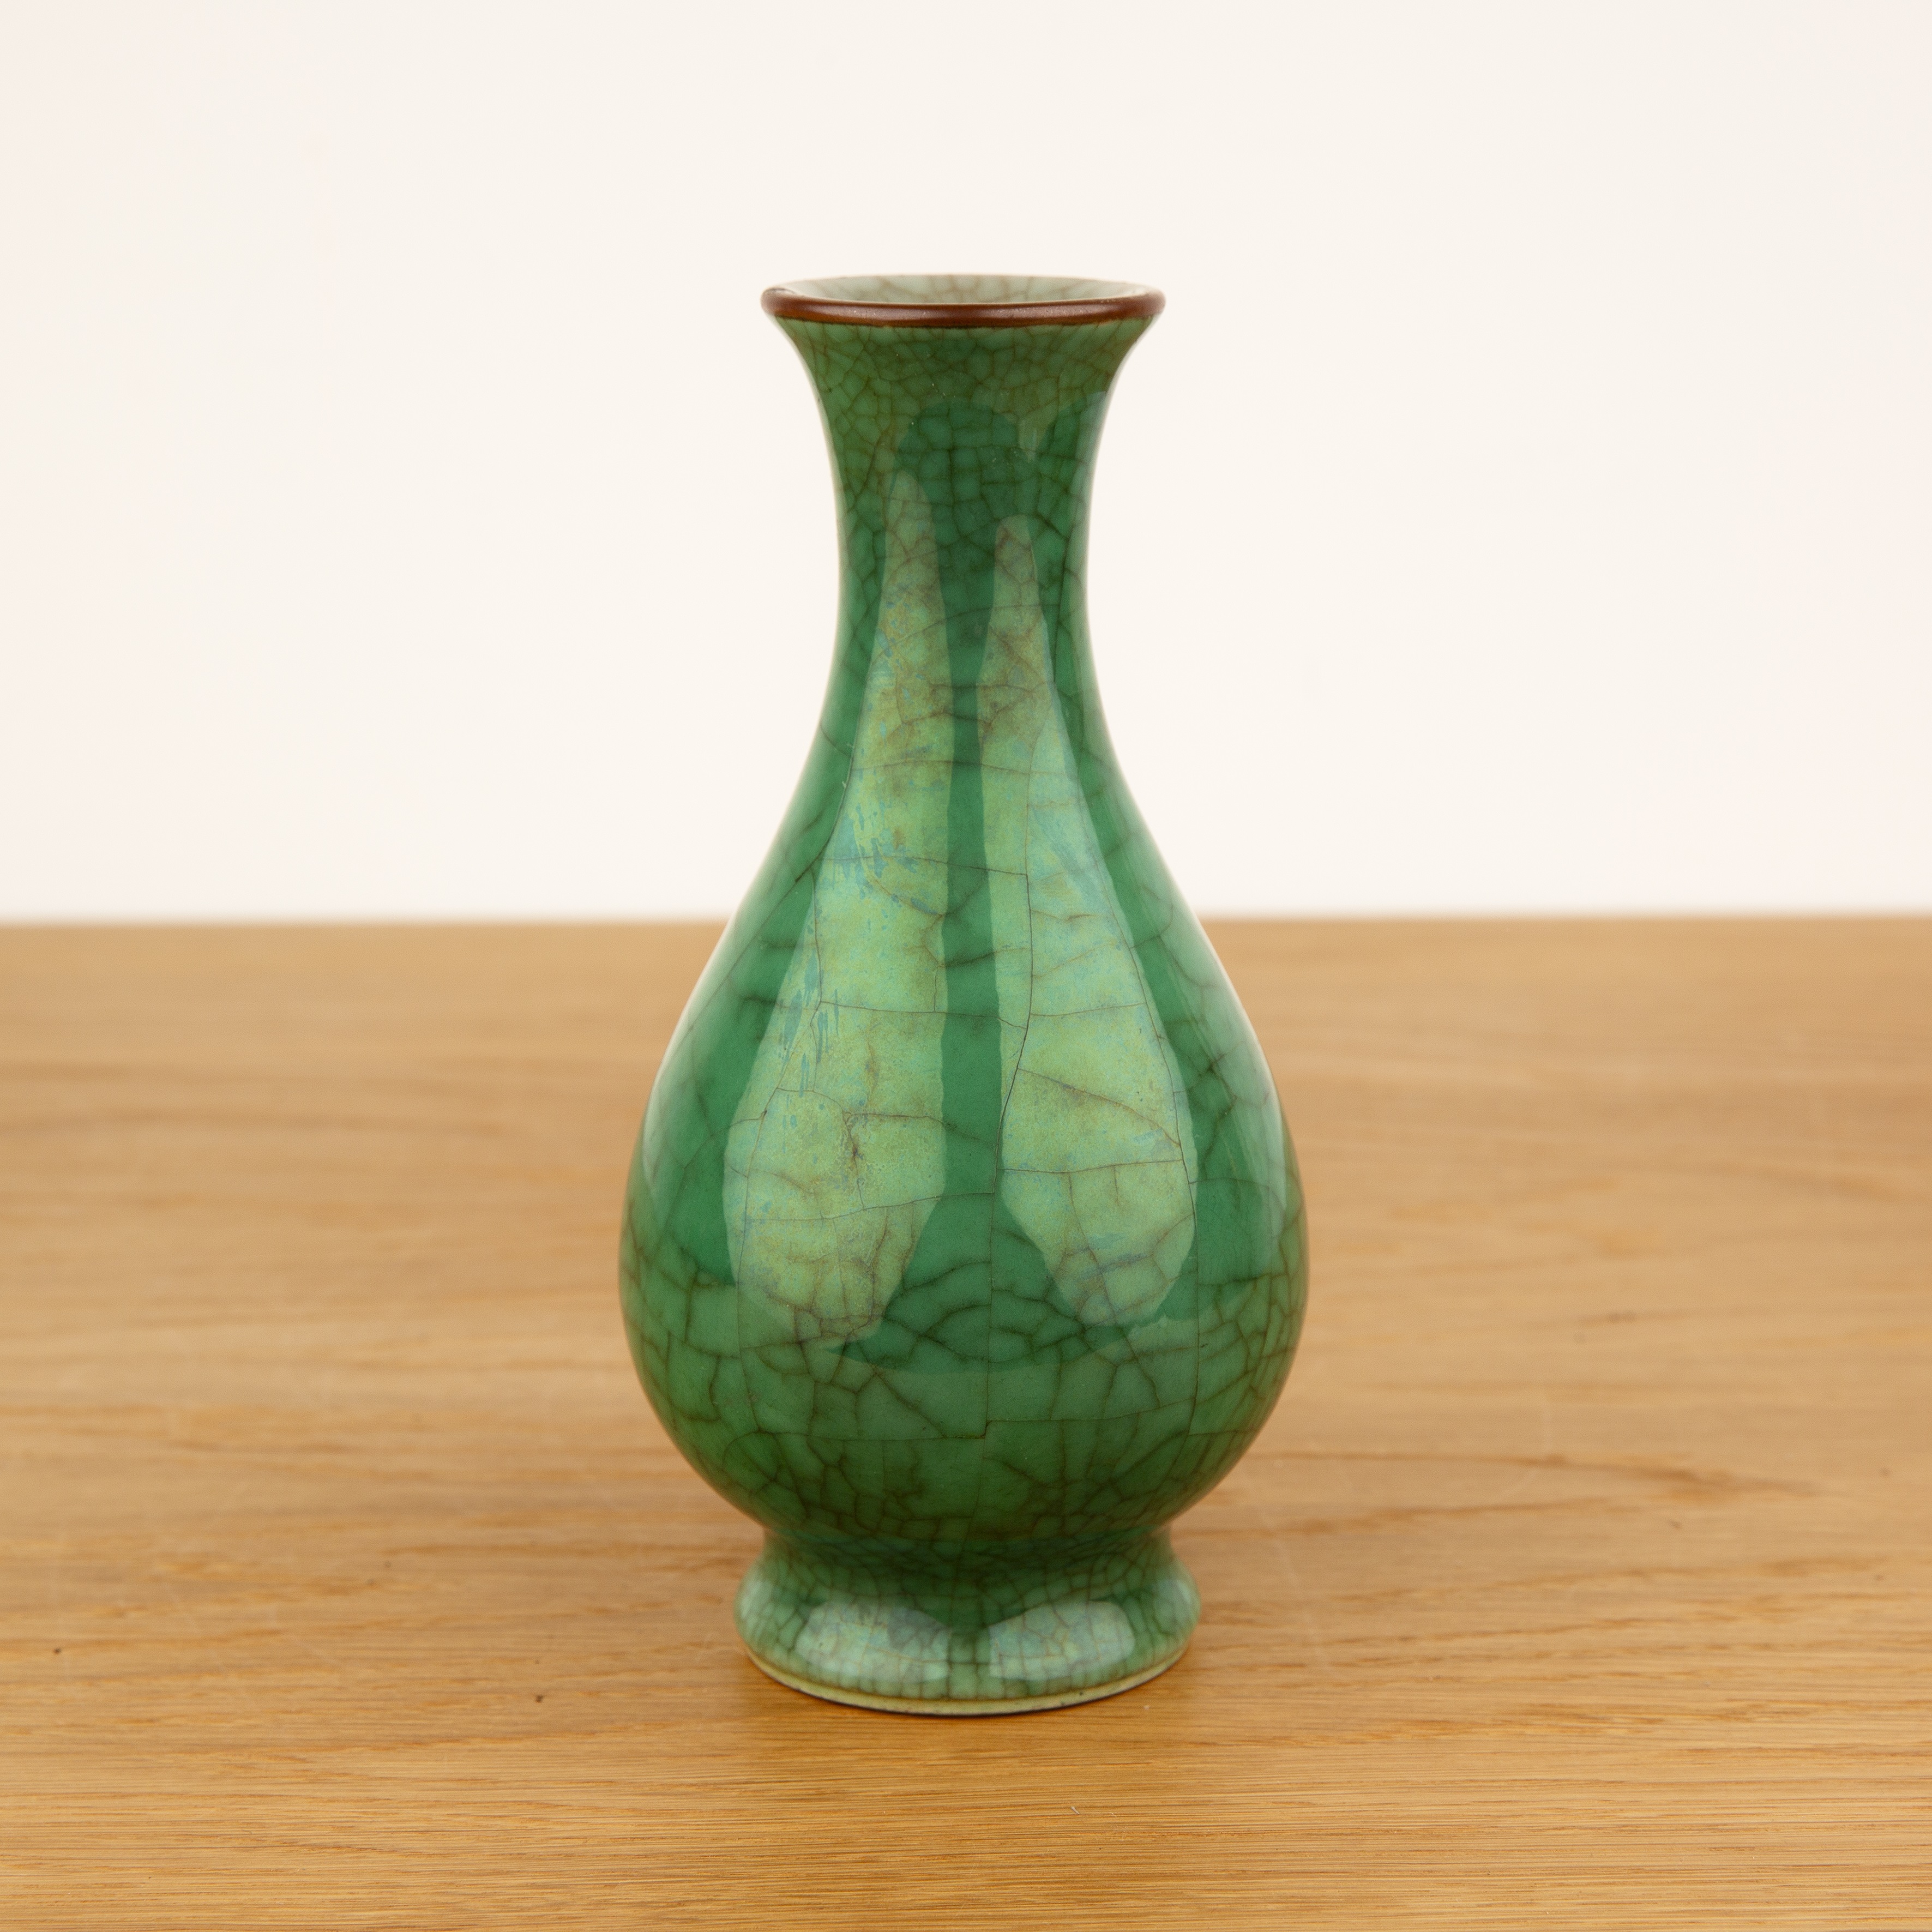 Green crackled glaze vase Chinese, 19th Century with a slightly raised foot rim, 19.4cm high Small - Image 2 of 4